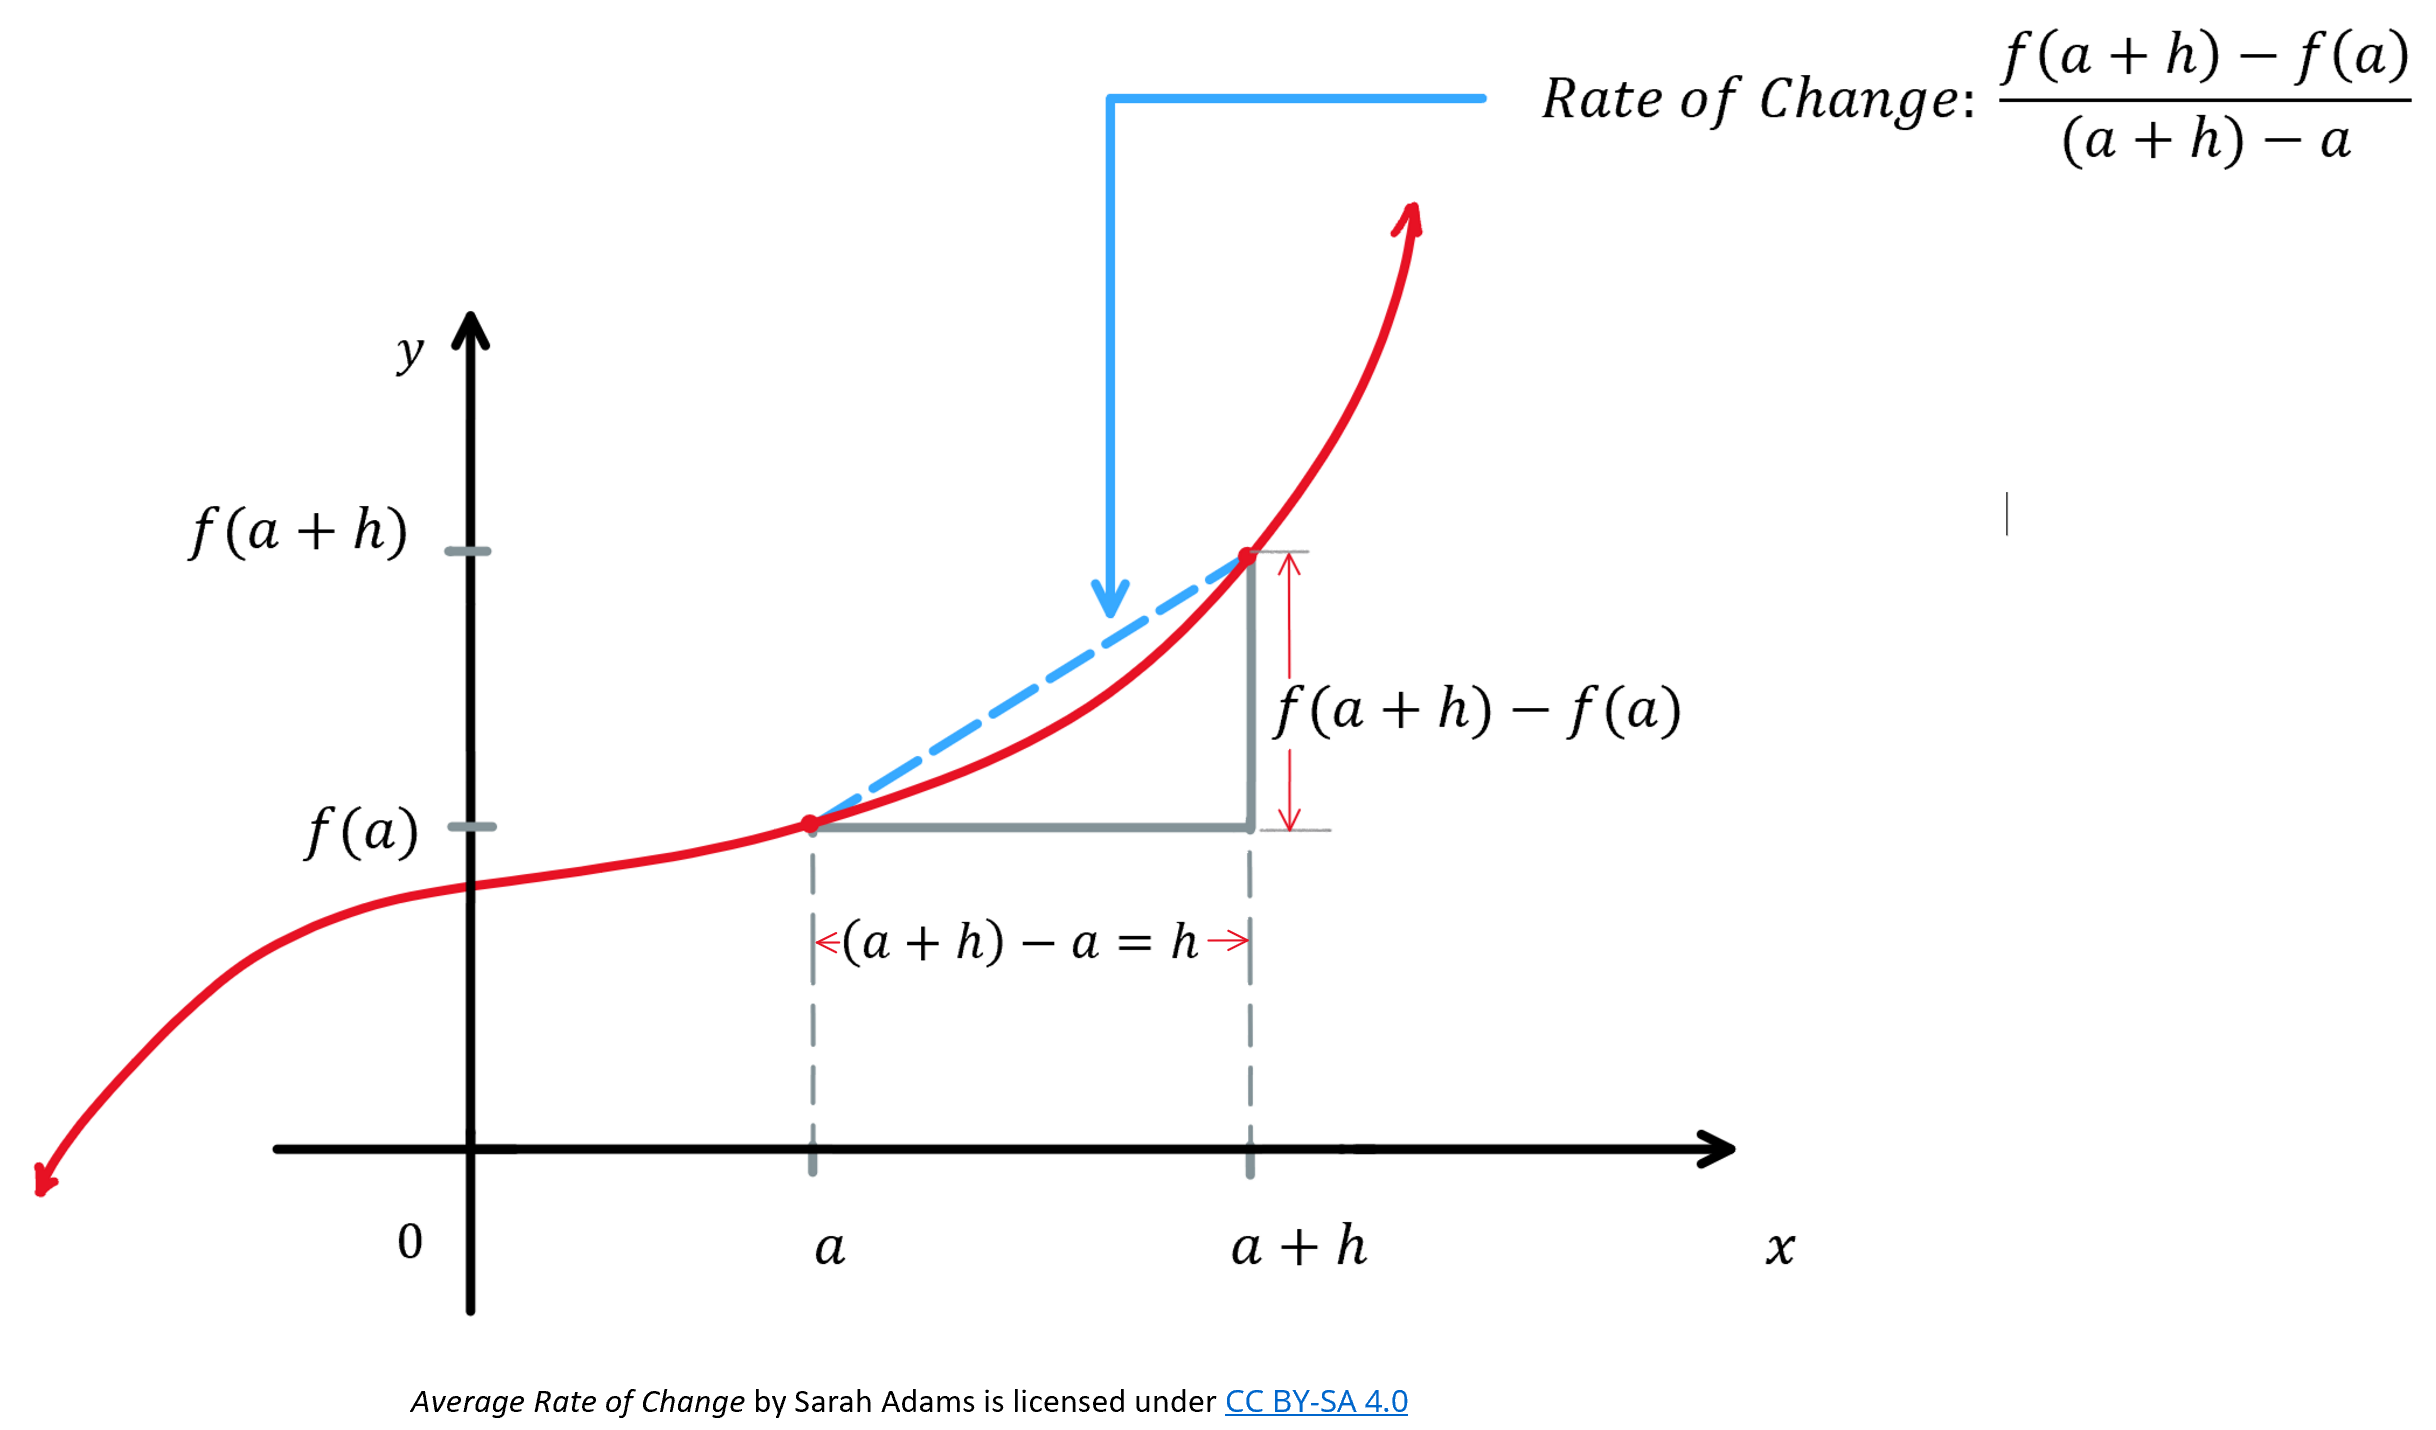 Rate of Change Image with a and h